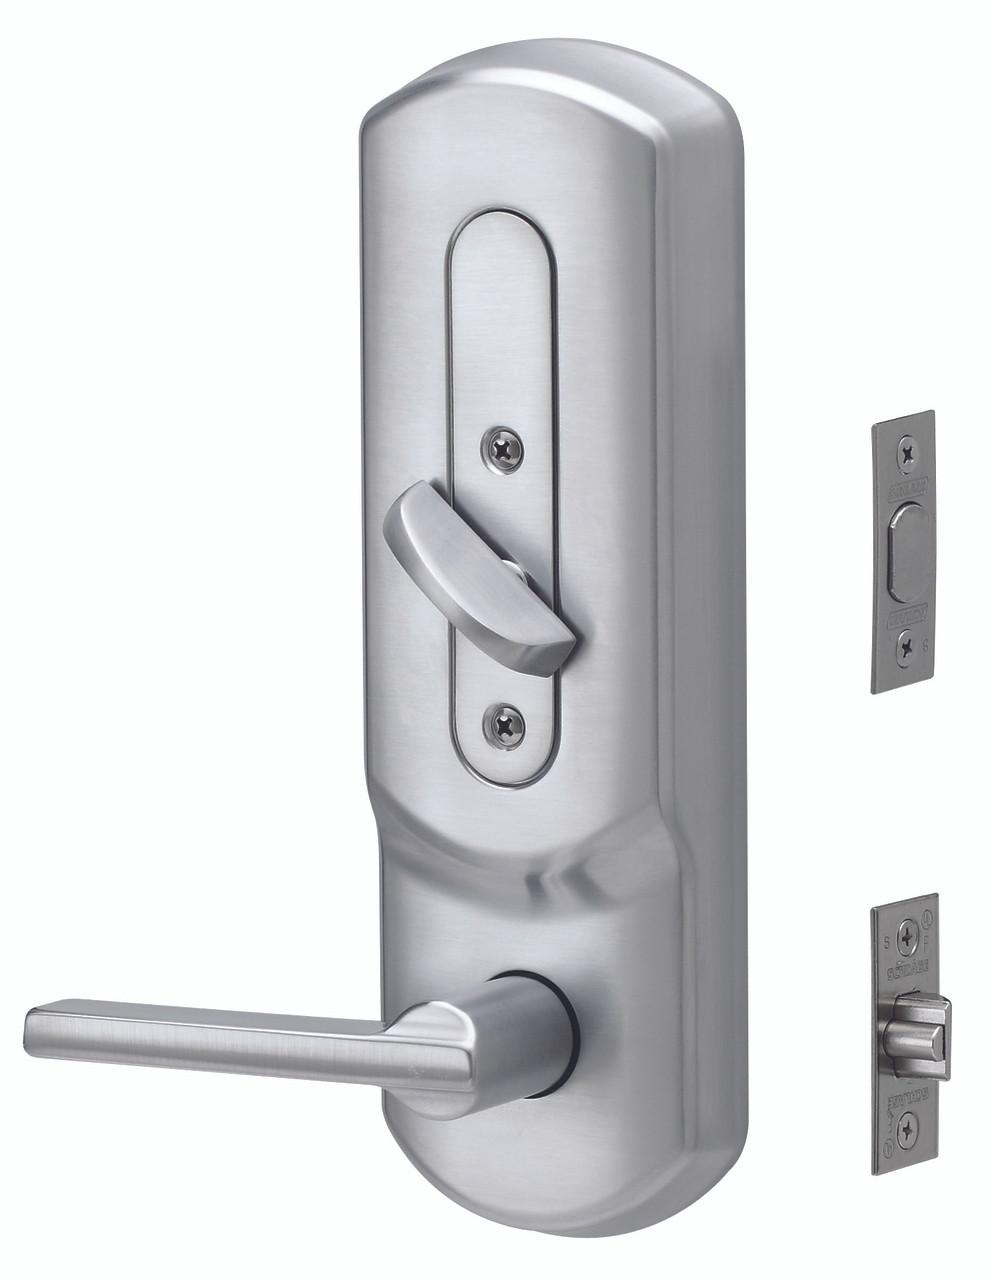 All about interconnected Locks